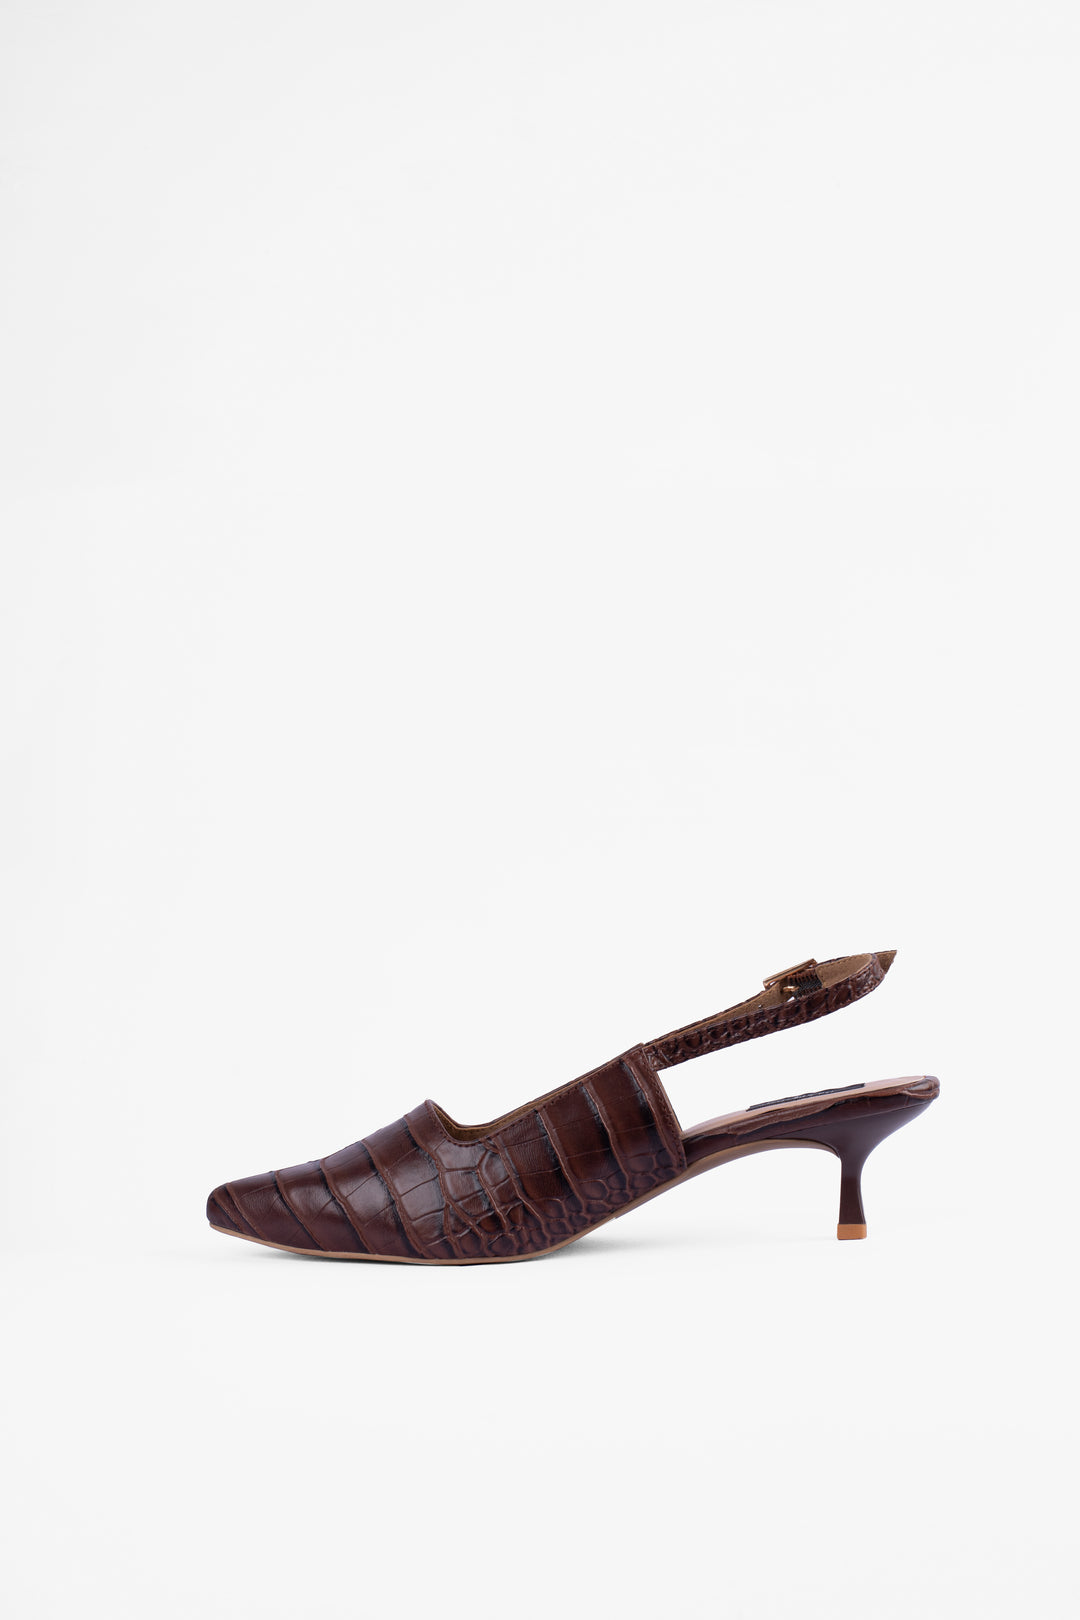 All You Need Heels- brown